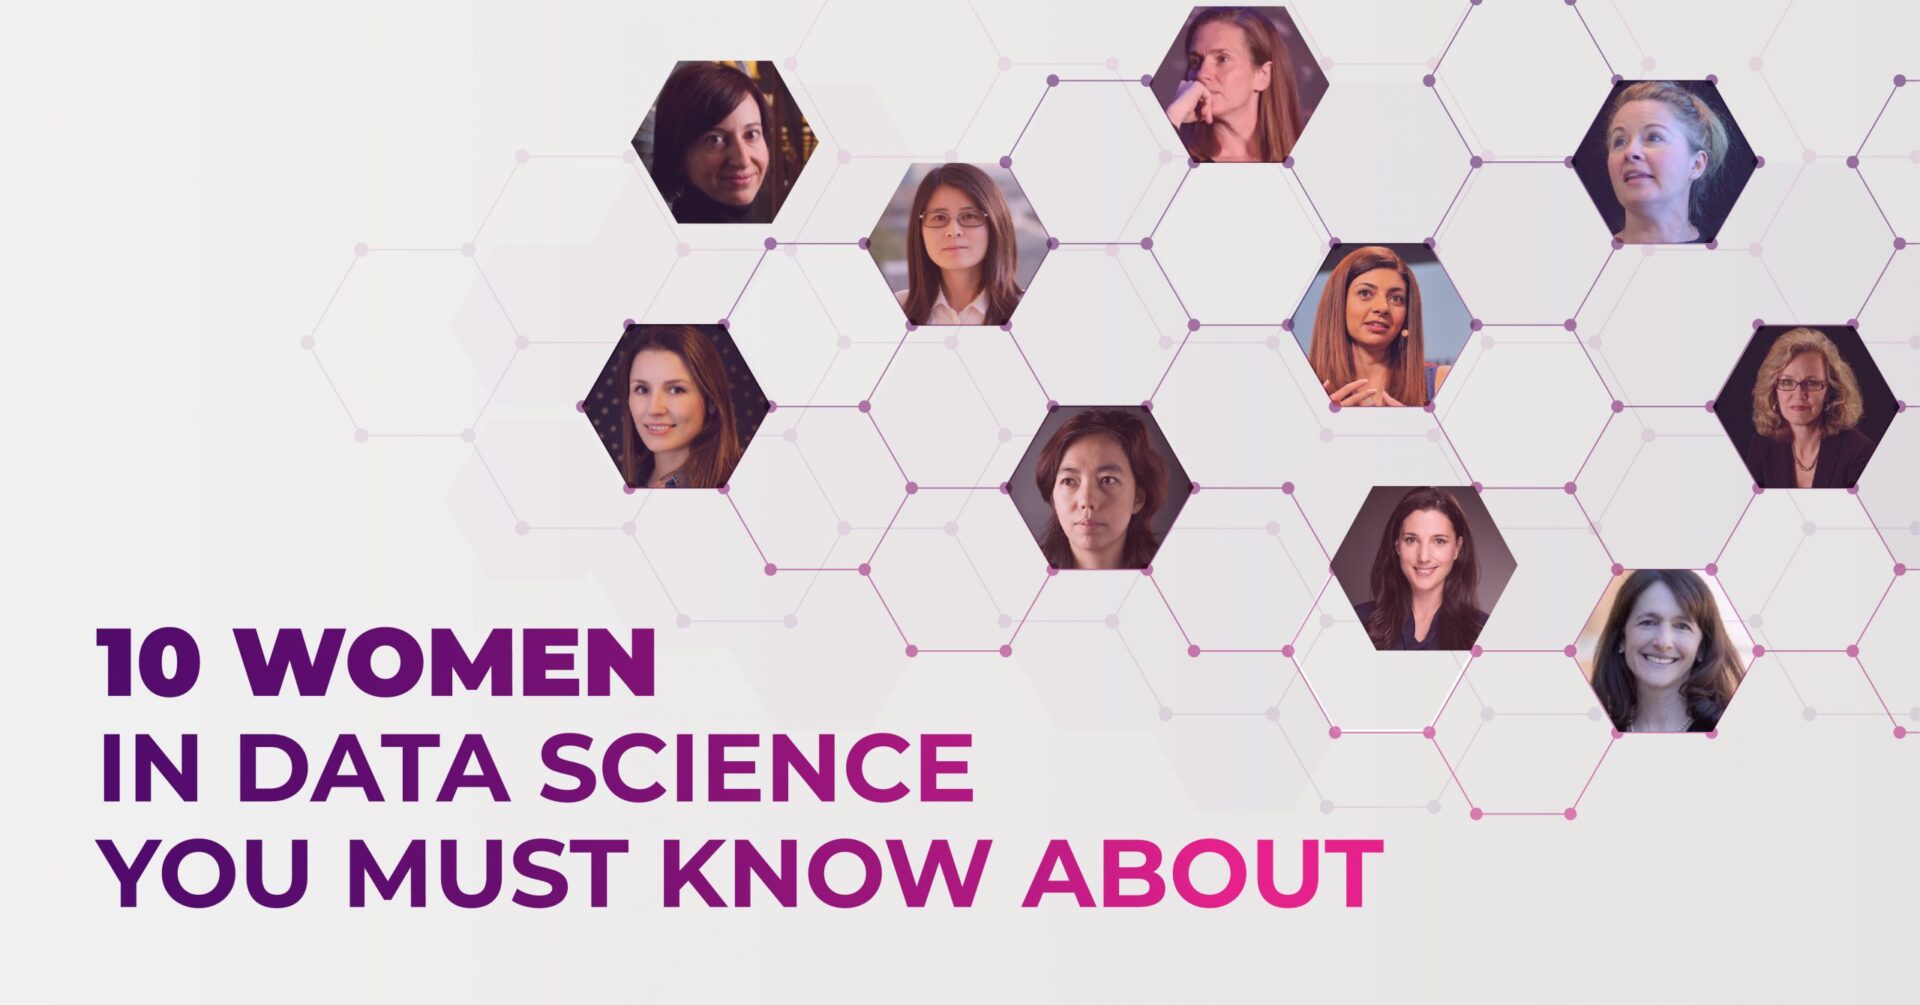 10 Women in Data Science You Must Know About